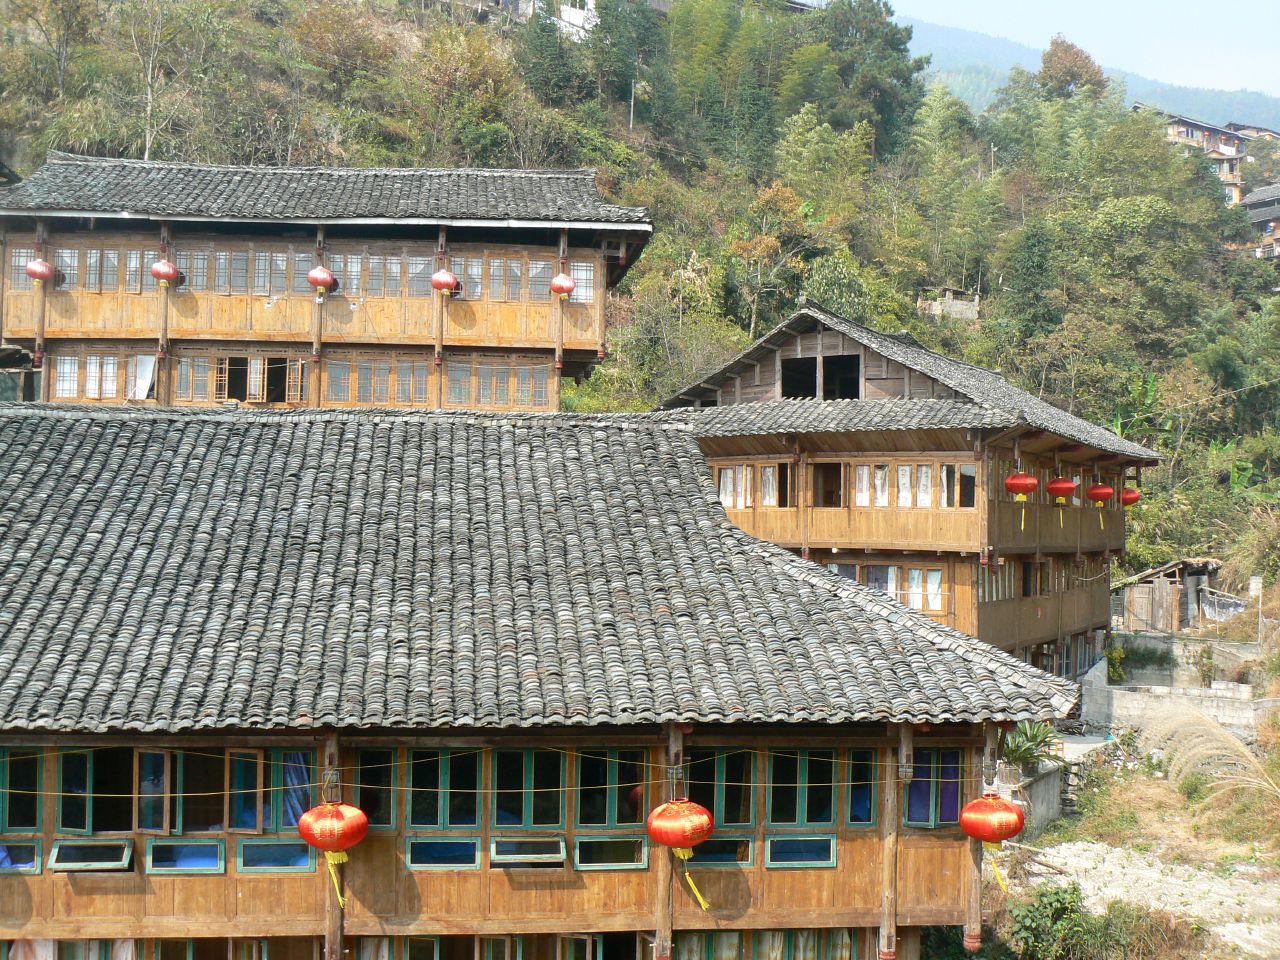 a house with chinese ornaments around the front windows